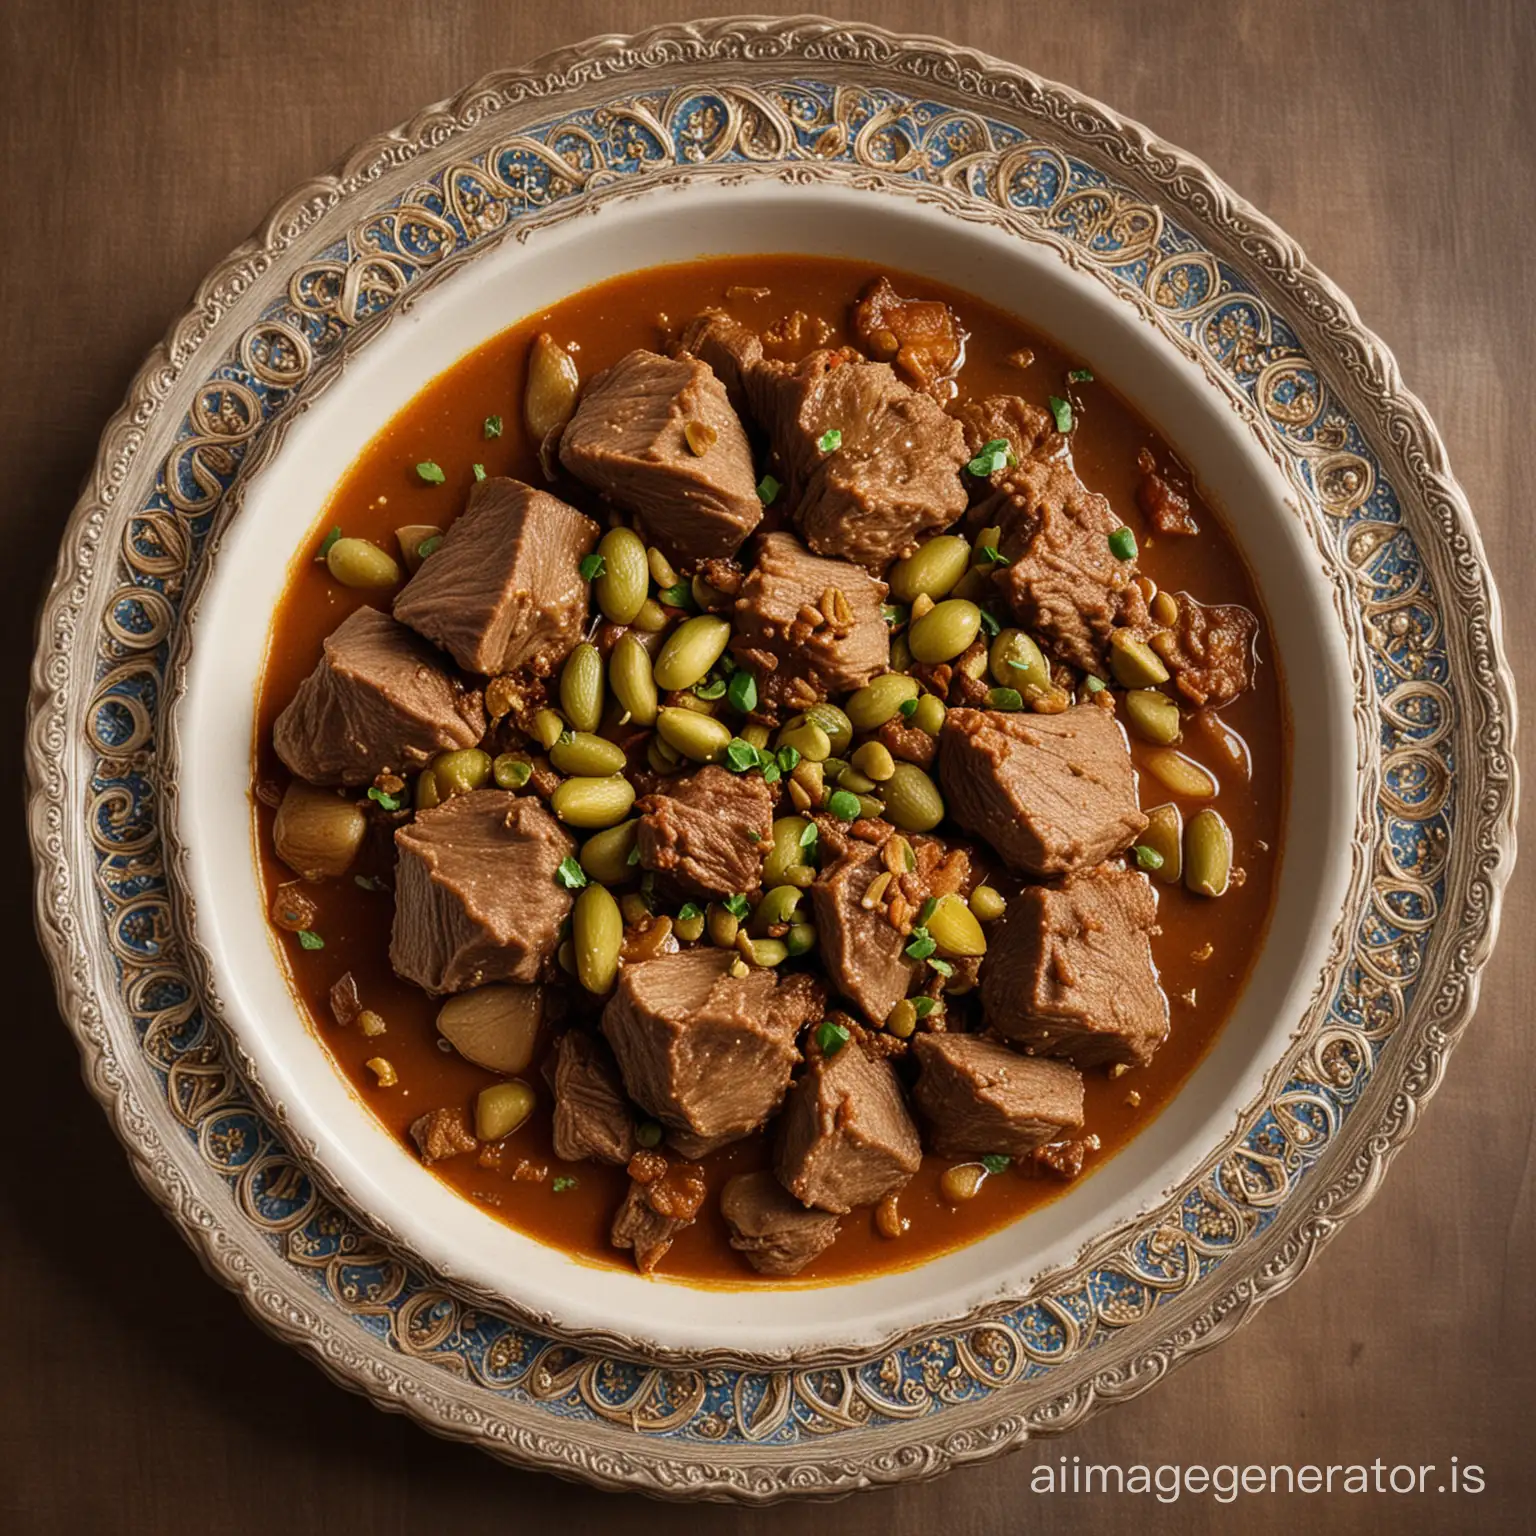 Exquisite-Roghani-A-Luxurious-Lamb-Stew-with-Saffron-and-Pistachios